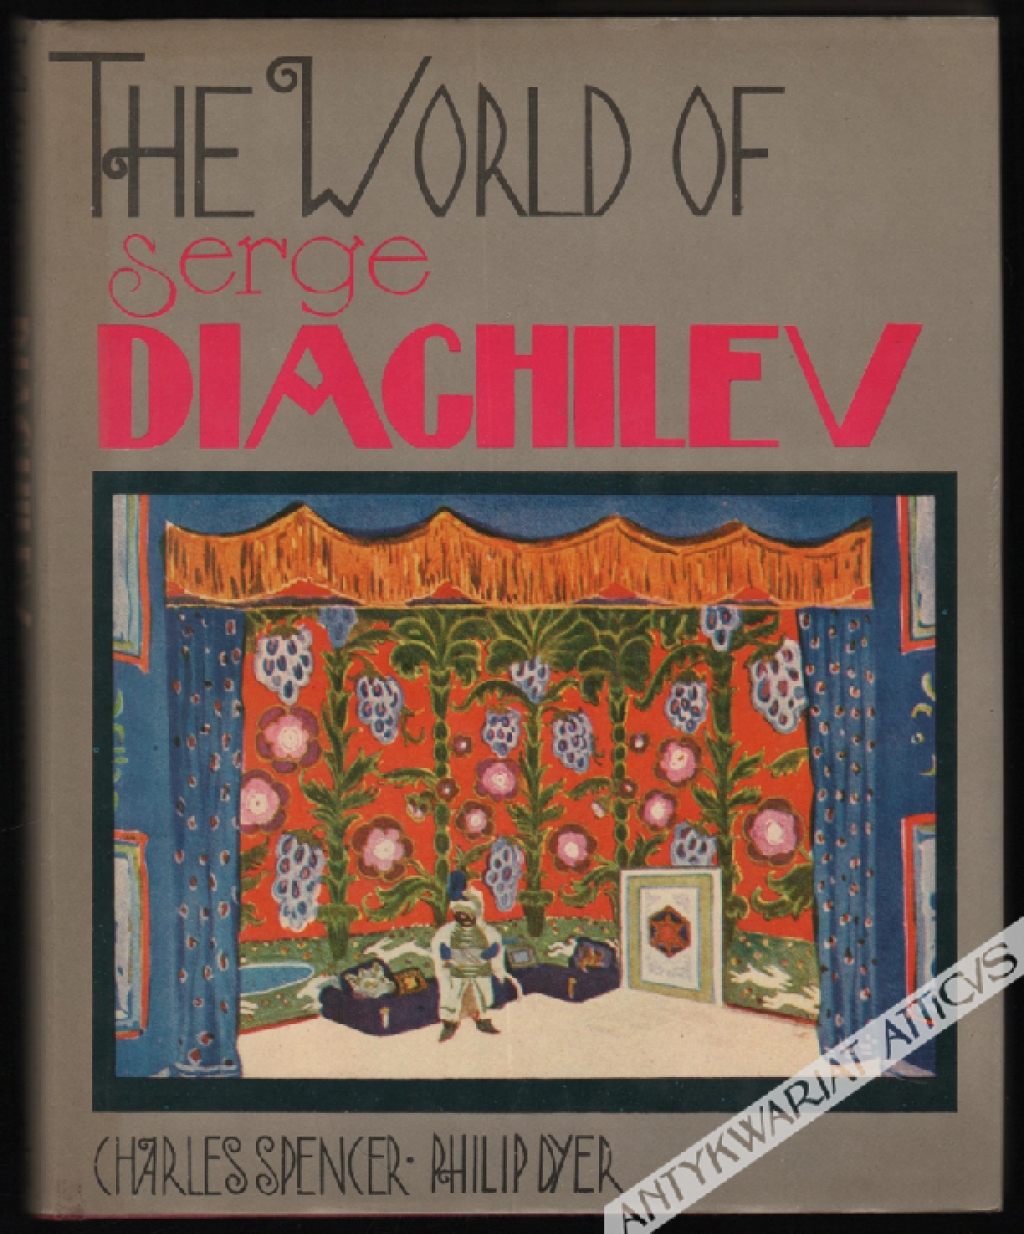 The World of Serge Diaghilev